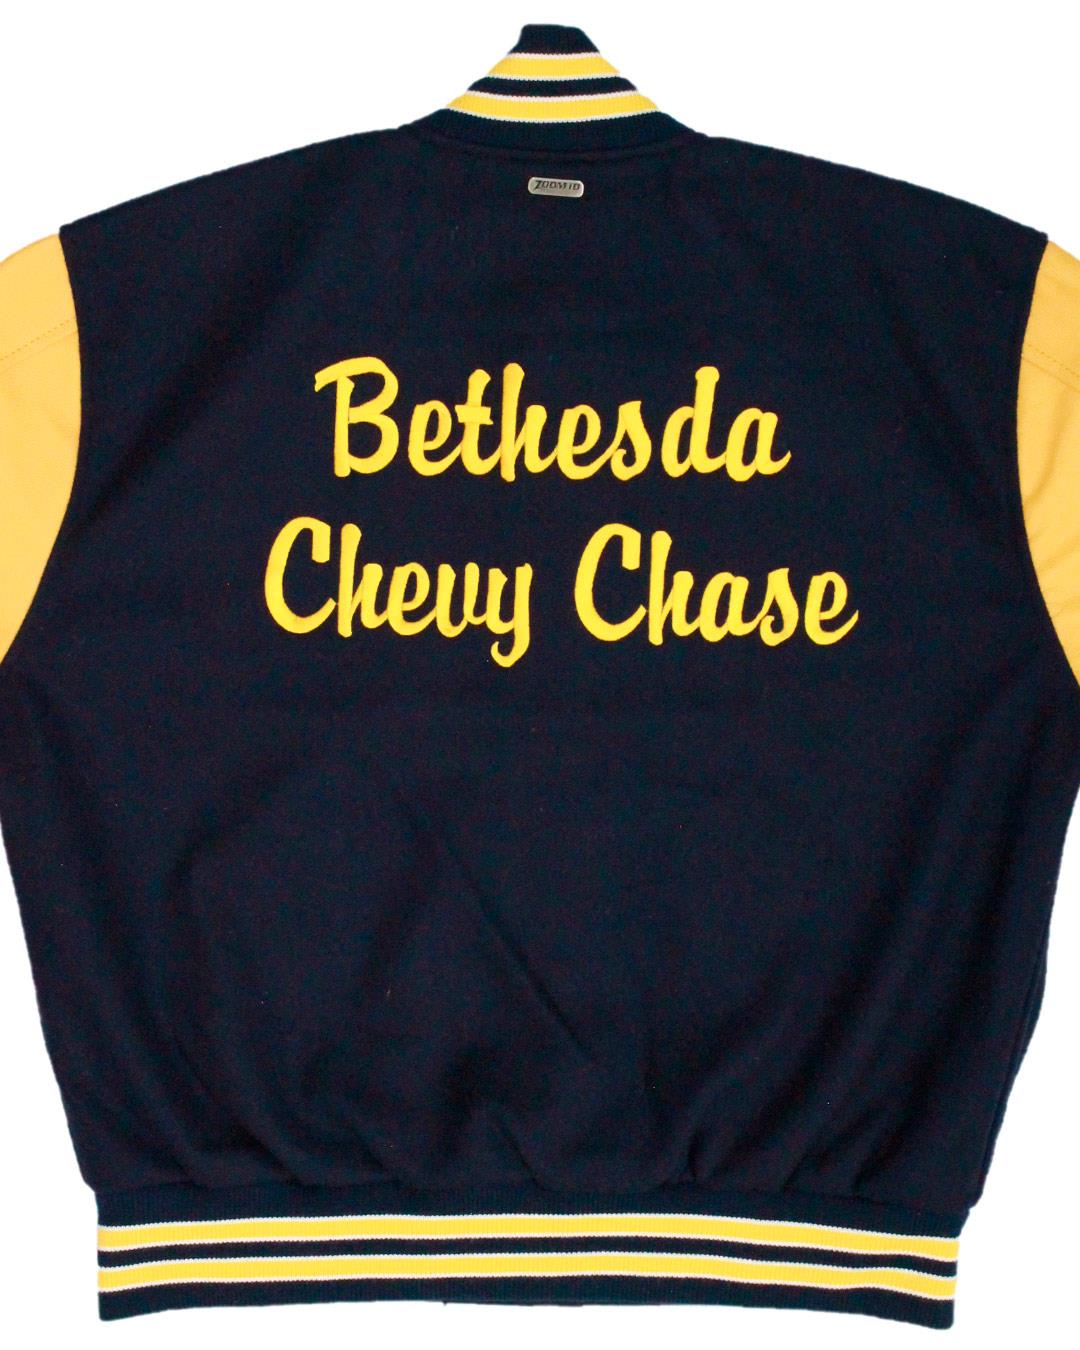 Bethesda-Chevy Chase High School Barons Letterman Jacket, Bethesda, MD - Back